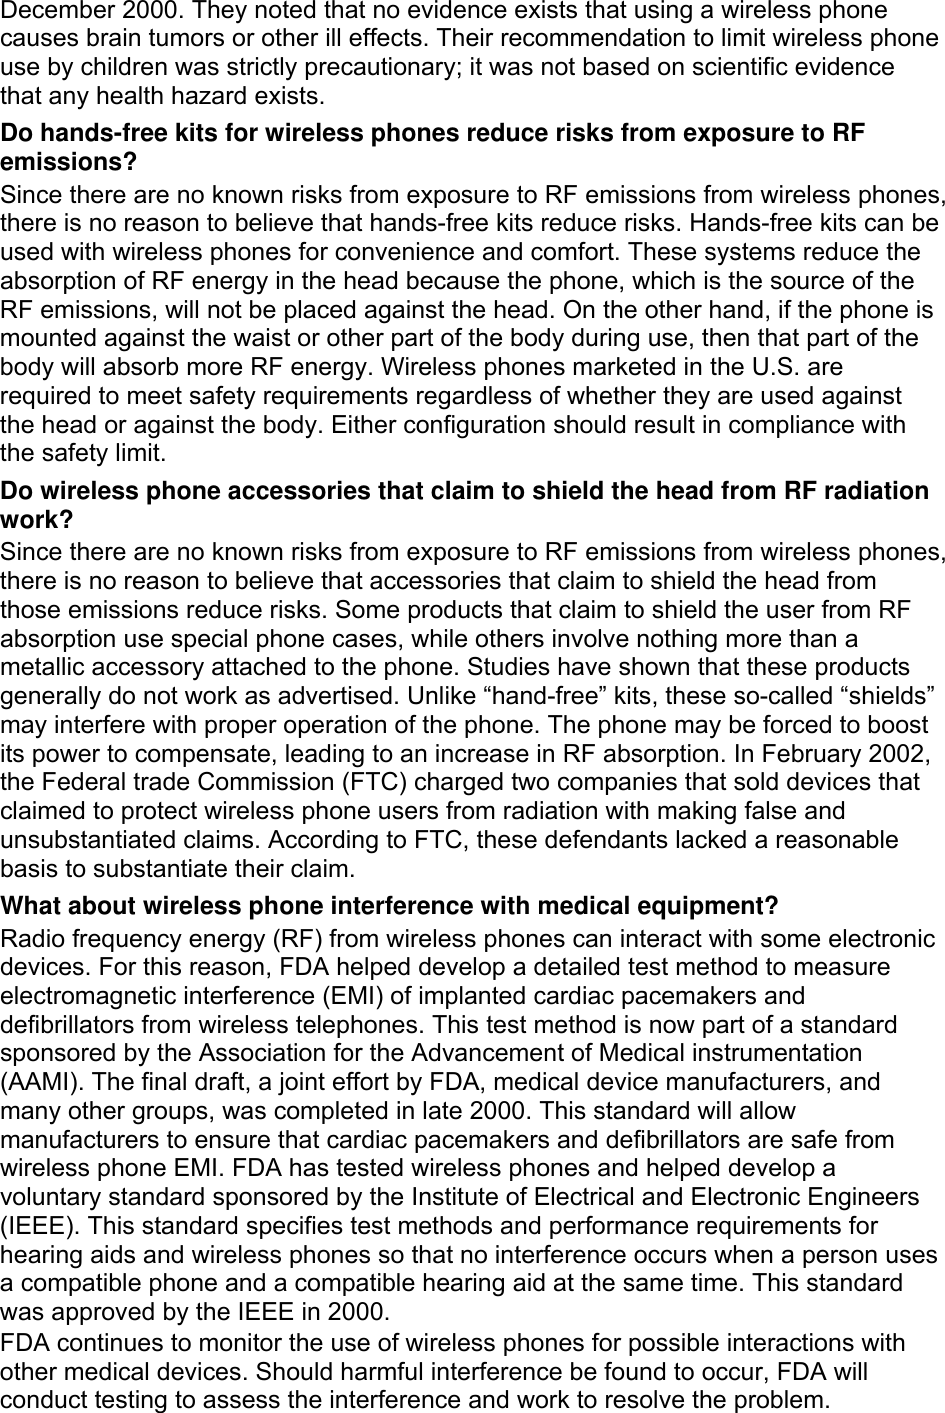 December 2000. They noted that no evidence exists that using a wireless phone causes brain tumors or other ill effects. Their recommendation to limit wireless phone use by children was strictly precautionary; it was not based on scientific evidence that any health hazard exists.   Do hands-free kits for wireless phones reduce risks from exposure to RF emissions? Since there are no known risks from exposure to RF emissions from wireless phones, there is no reason to believe that hands-free kits reduce risks. Hands-free kits can be used with wireless phones for convenience and comfort. These systems reduce the absorption of RF energy in the head because the phone, which is the source of the RF emissions, will not be placed against the head. On the other hand, if the phone is mounted against the waist or other part of the body during use, then that part of the body will absorb more RF energy. Wireless phones marketed in the U.S. are required to meet safety requirements regardless of whether they are used against the head or against the body. Either configuration should result in compliance with the safety limit. Do wireless phone accessories that claim to shield the head from RF radiation work? Since there are no known risks from exposure to RF emissions from wireless phones, there is no reason to believe that accessories that claim to shield the head from those emissions reduce risks. Some products that claim to shield the user from RF absorption use special phone cases, while others involve nothing more than a metallic accessory attached to the phone. Studies have shown that these products generally do not work as advertised. Unlike “hand-free” kits, these so-called “shields” may interfere with proper operation of the phone. The phone may be forced to boost its power to compensate, leading to an increase in RF absorption. In February 2002, the Federal trade Commission (FTC) charged two companies that sold devices that claimed to protect wireless phone users from radiation with making false and unsubstantiated claims. According to FTC, these defendants lacked a reasonable basis to substantiate their claim. What about wireless phone interference with medical equipment? Radio frequency energy (RF) from wireless phones can interact with some electronic devices. For this reason, FDA helped develop a detailed test method to measure electromagnetic interference (EMI) of implanted cardiac pacemakers and defibrillators from wireless telephones. This test method is now part of a standard sponsored by the Association for the Advancement of Medical instrumentation (AAMI). The final draft, a joint effort by FDA, medical device manufacturers, and many other groups, was completed in late 2000. This standard will allow manufacturers to ensure that cardiac pacemakers and defibrillators are safe from wireless phone EMI. FDA has tested wireless phones and helped develop a voluntary standard sponsored by the Institute of Electrical and Electronic Engineers (IEEE). This standard specifies test methods and performance requirements for hearing aids and wireless phones so that no interference occurs when a person uses a compatible phone and a compatible hearing aid at the same time. This standard was approved by the IEEE in 2000. FDA continues to monitor the use of wireless phones for possible interactions with other medical devices. Should harmful interference be found to occur, FDA will conduct testing to assess the interference and work to resolve the problem. 